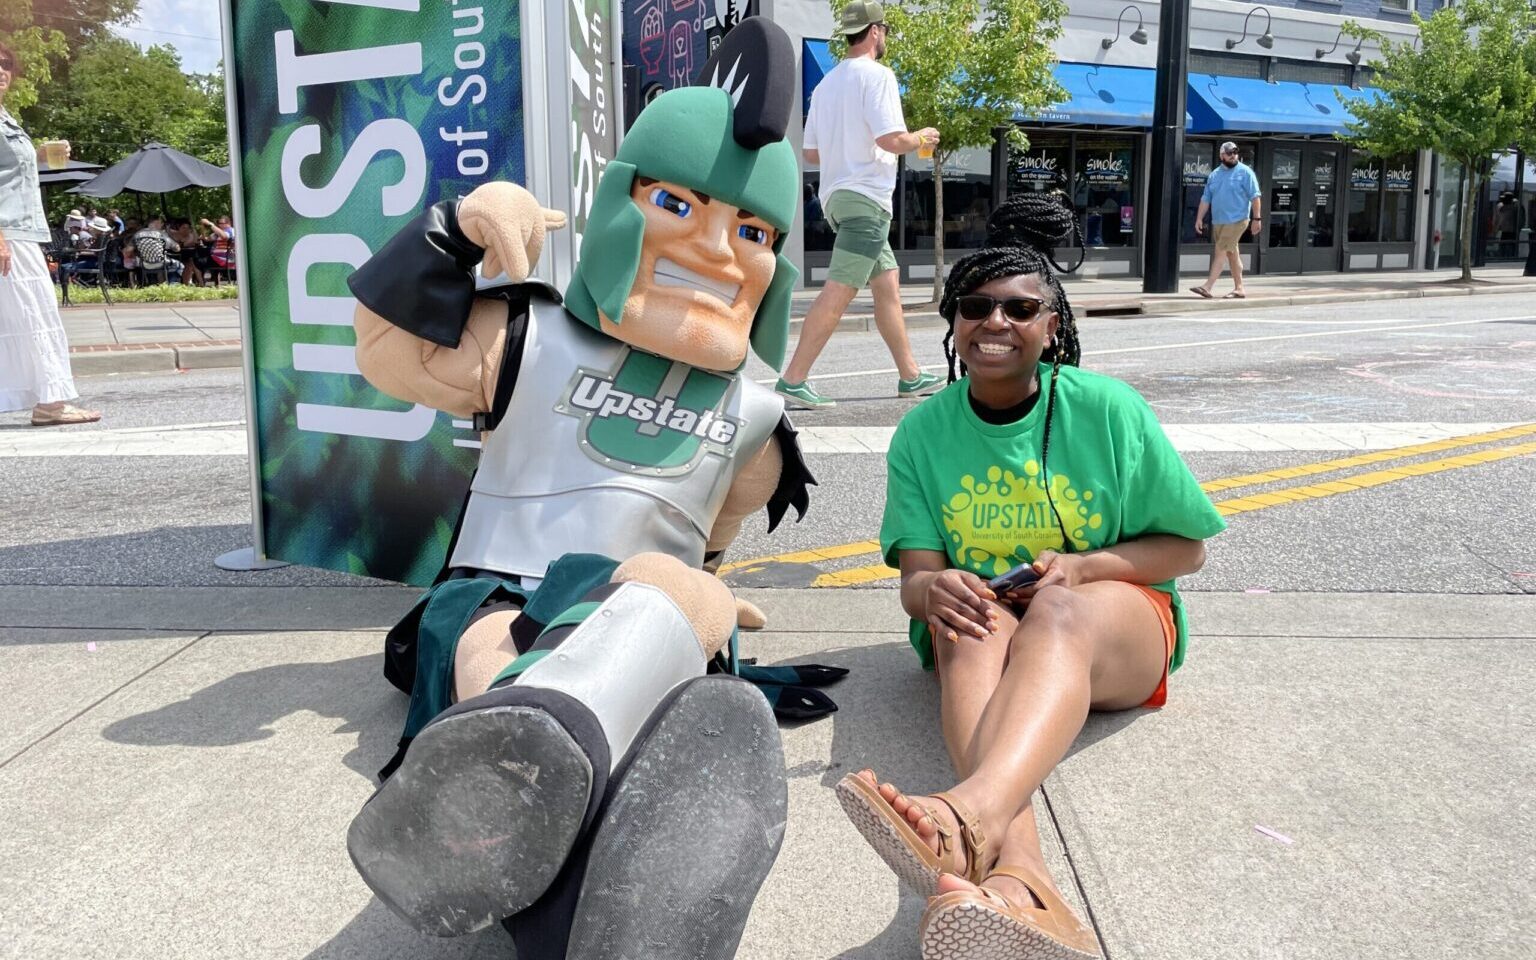 Sparty with a student